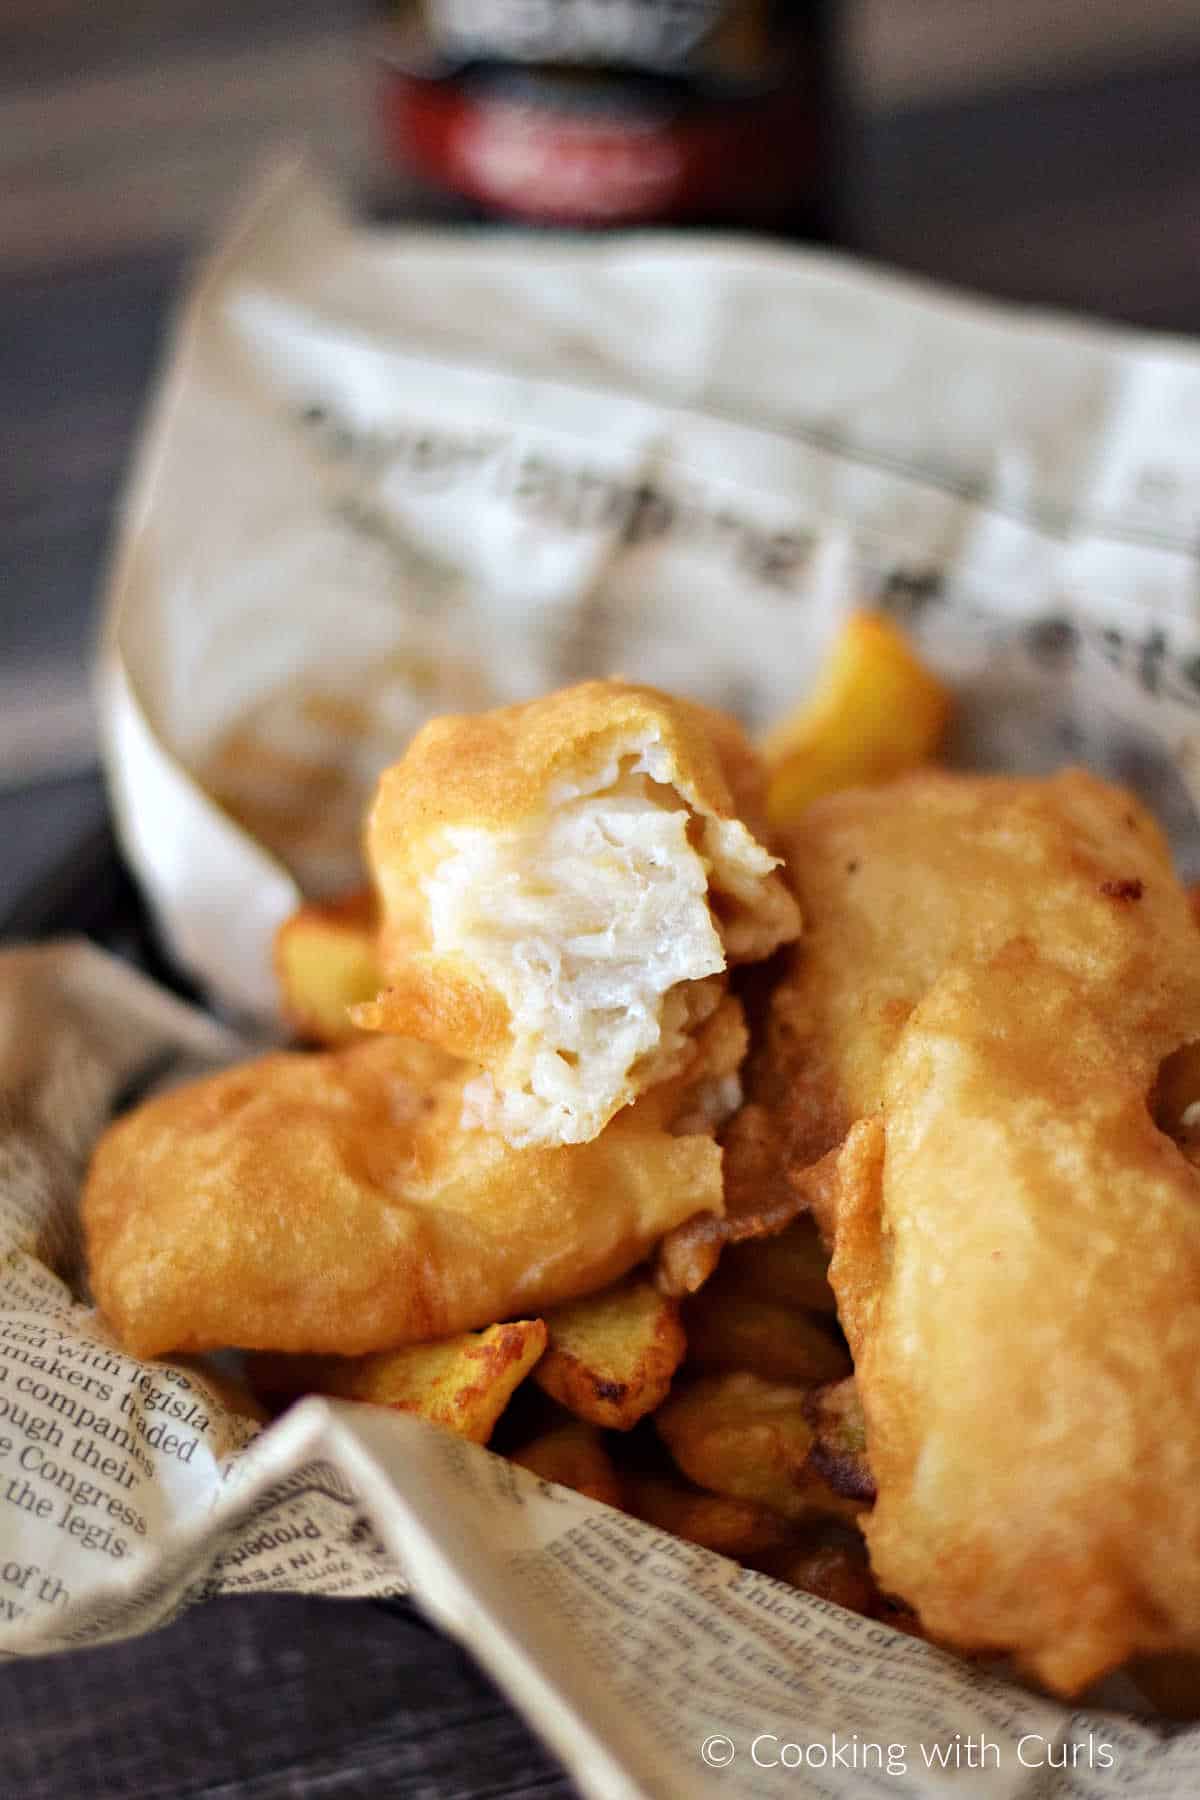 A broken piece of beer batter fish resting on a pile of fish and French fries.